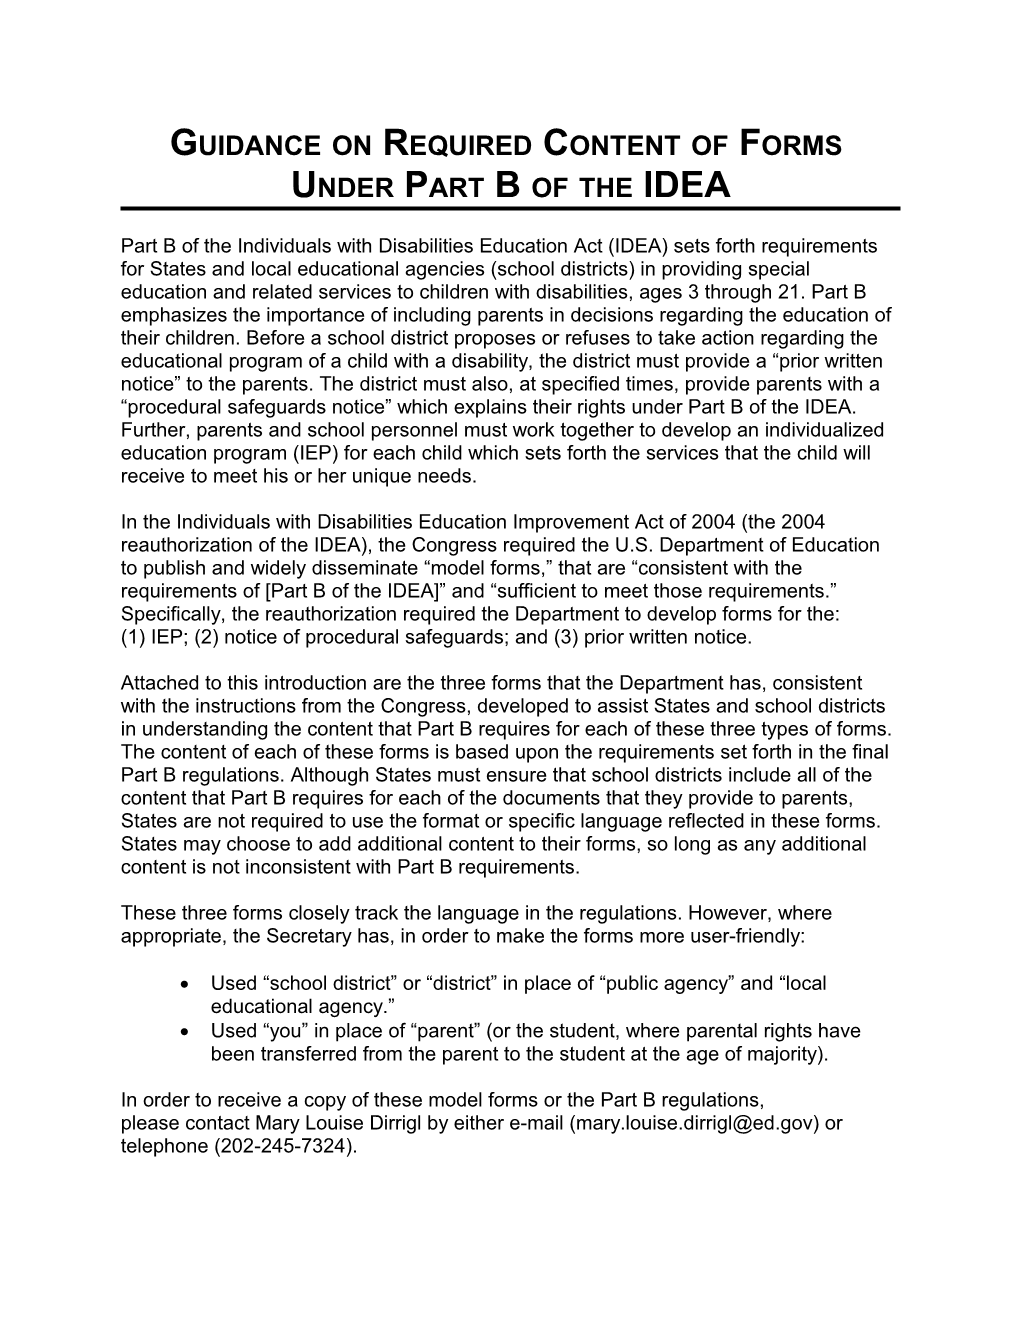 IDEA 2004 Model Forms: Guidance on Required Content of Forms Under Part B of the Idea (MS Word)